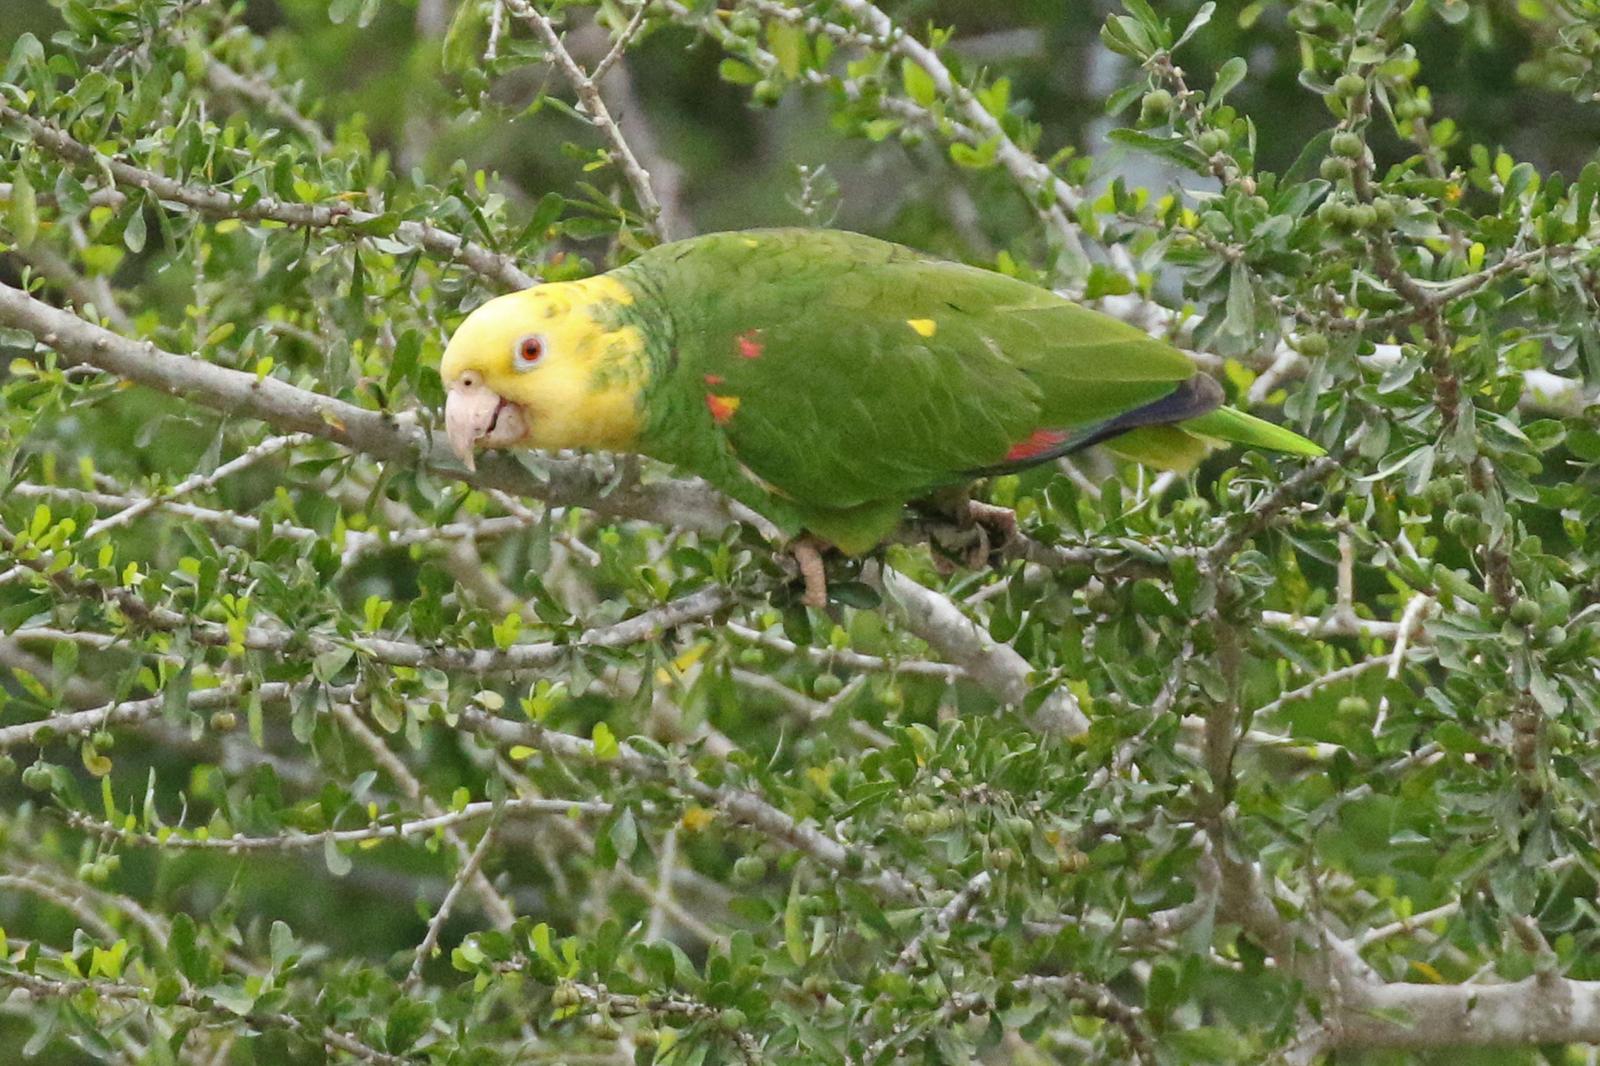 Yellow-headed Parrot Photo by Kristy Baker